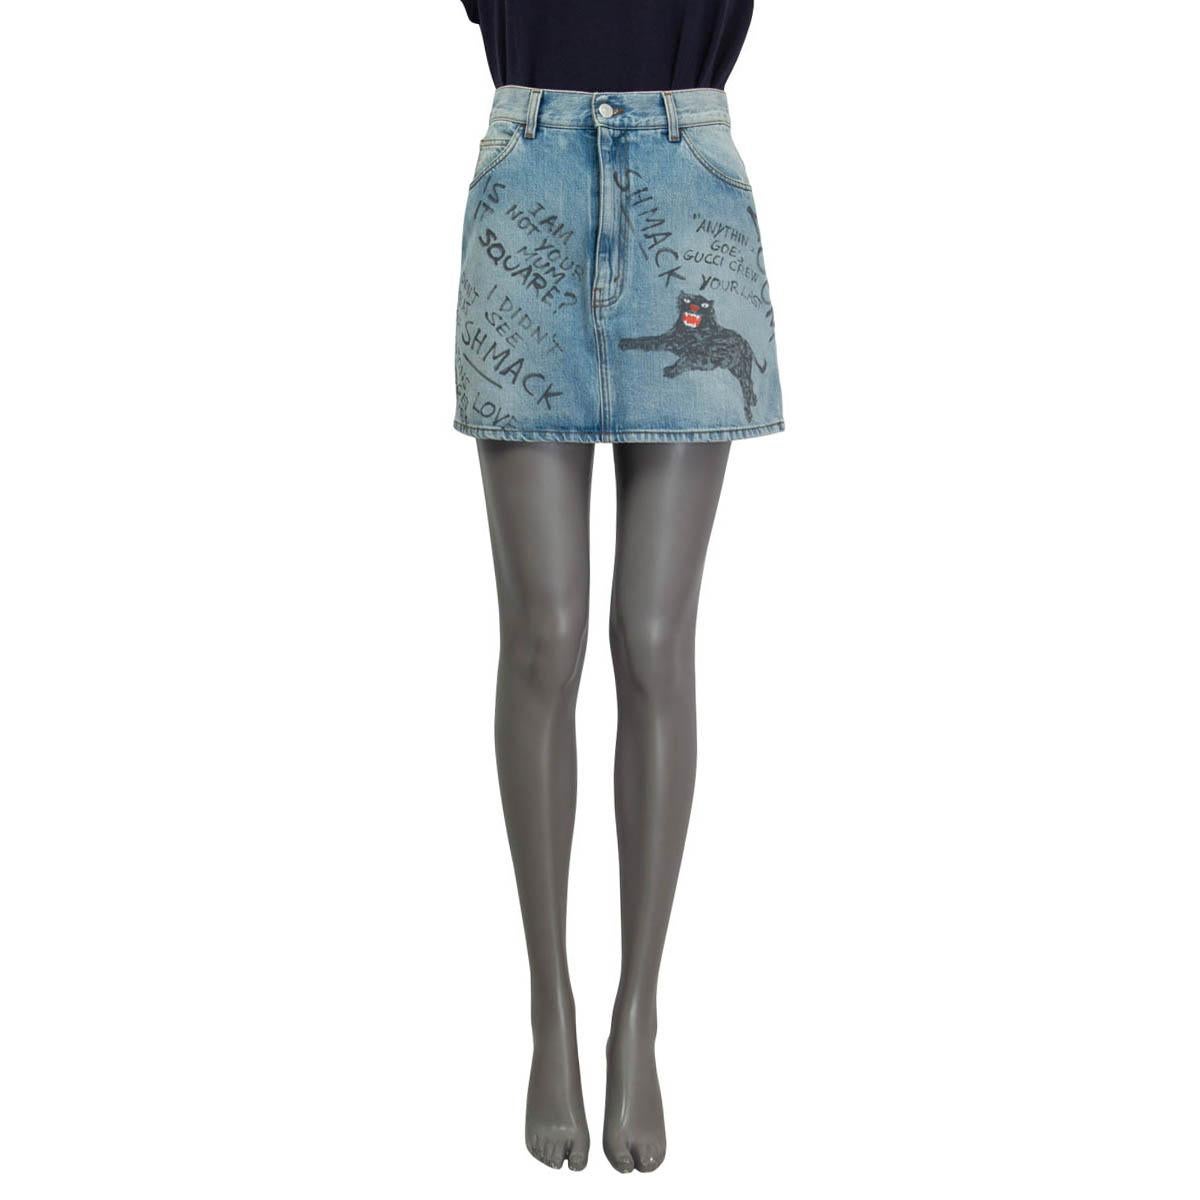 100% authentic Gucci denim mini skirt in washed out light blue cotton (100%). Features a scribbled gray writing and a panther on the skirt. Has two slit pockets on the front and two on the back. Opens with a 'Gucci' button and a concealed zipper on